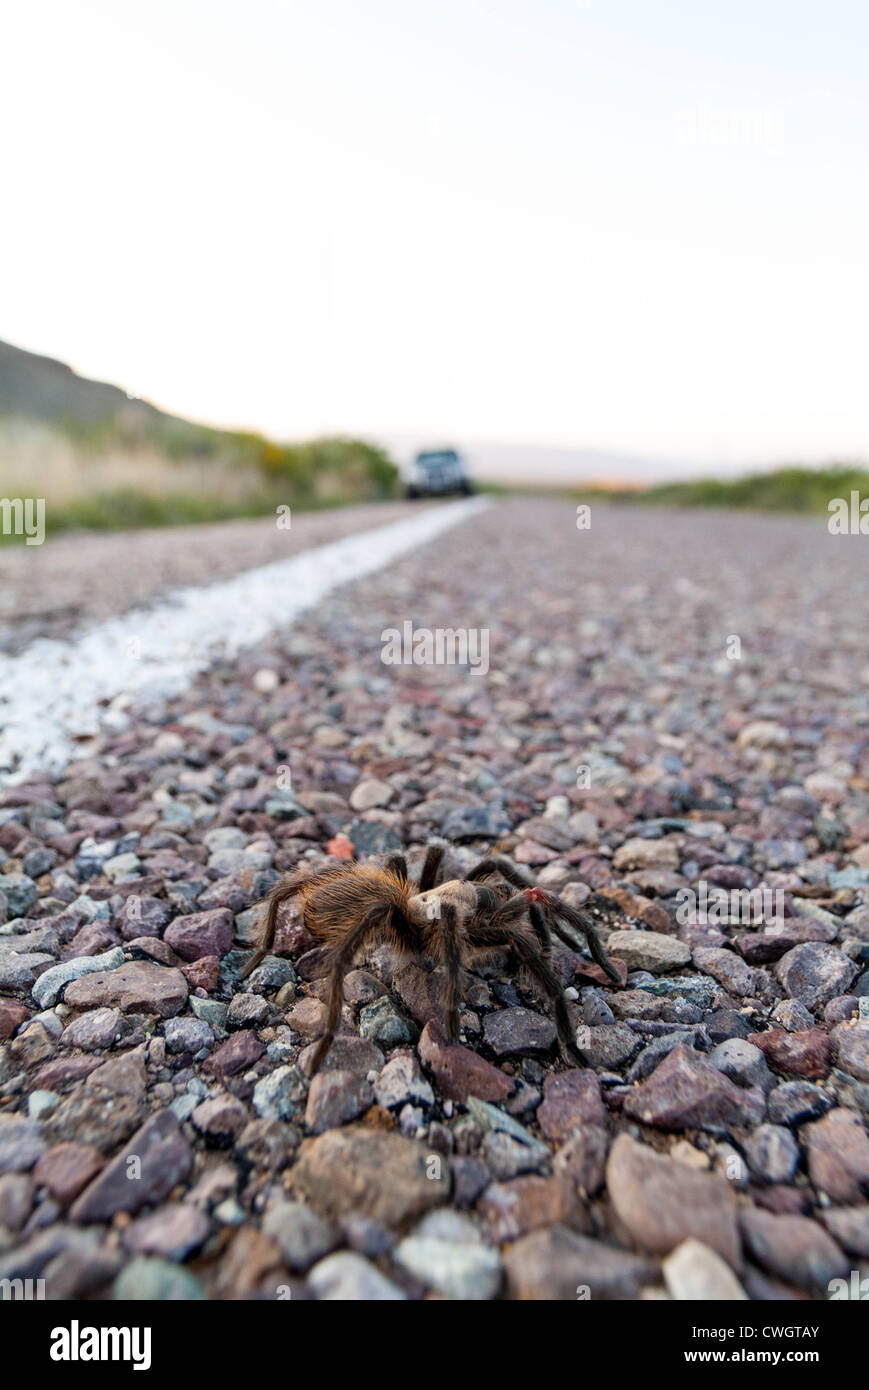 Tarantula in the desert with mountain in background - Big Bend National Park Stock Photo